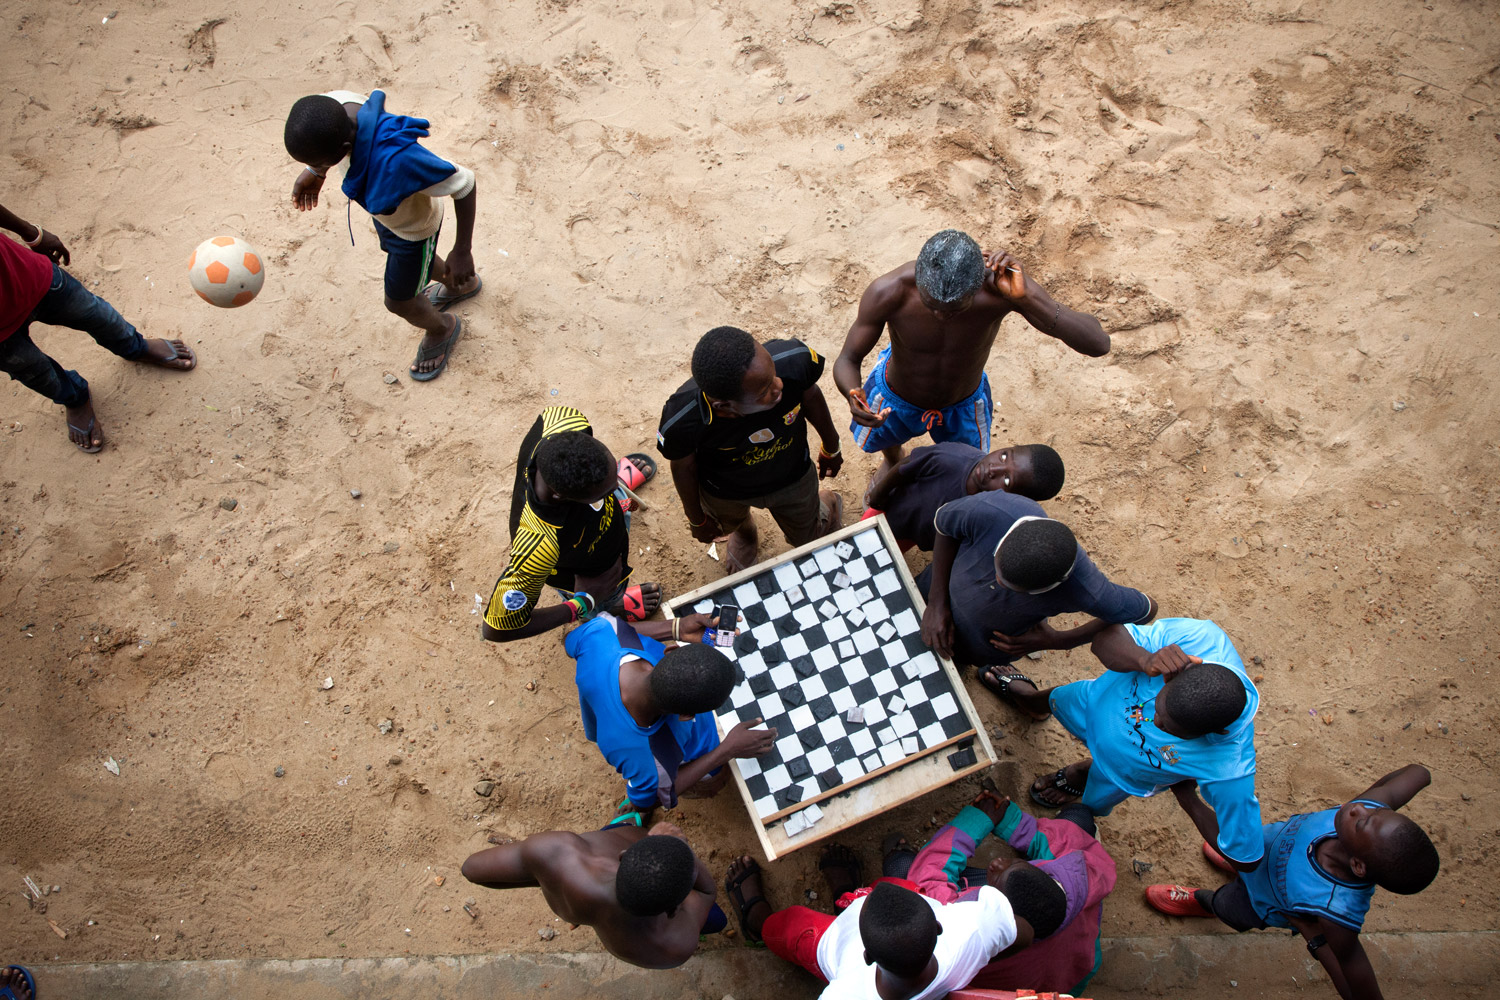 Checkers is popular in Sierra Leone, and provides entertainment for groups of young people at the Saint Michael rehabilitation center.